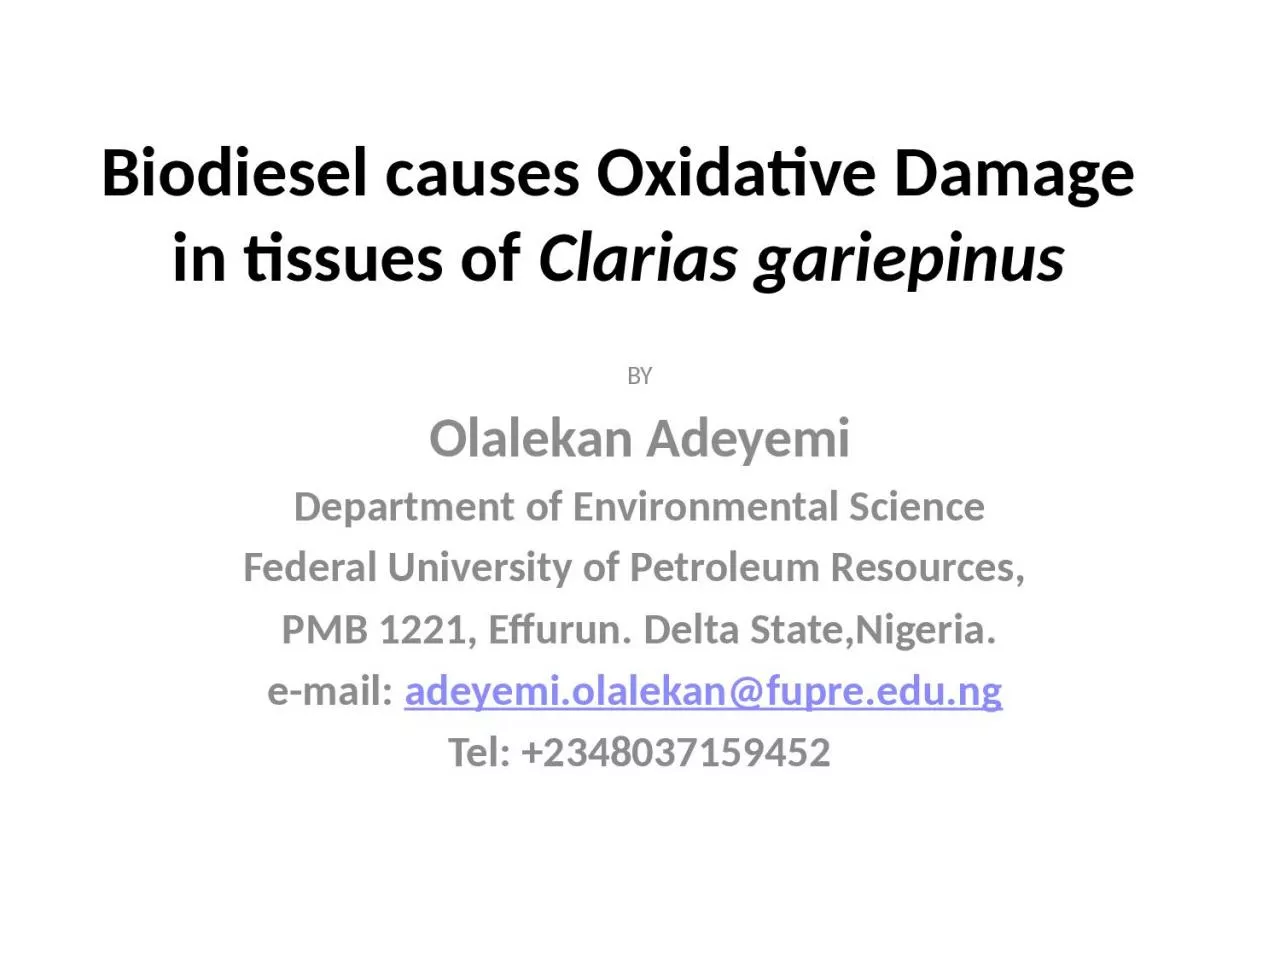 Biodiesel causes Oxidative Damage in tissues of